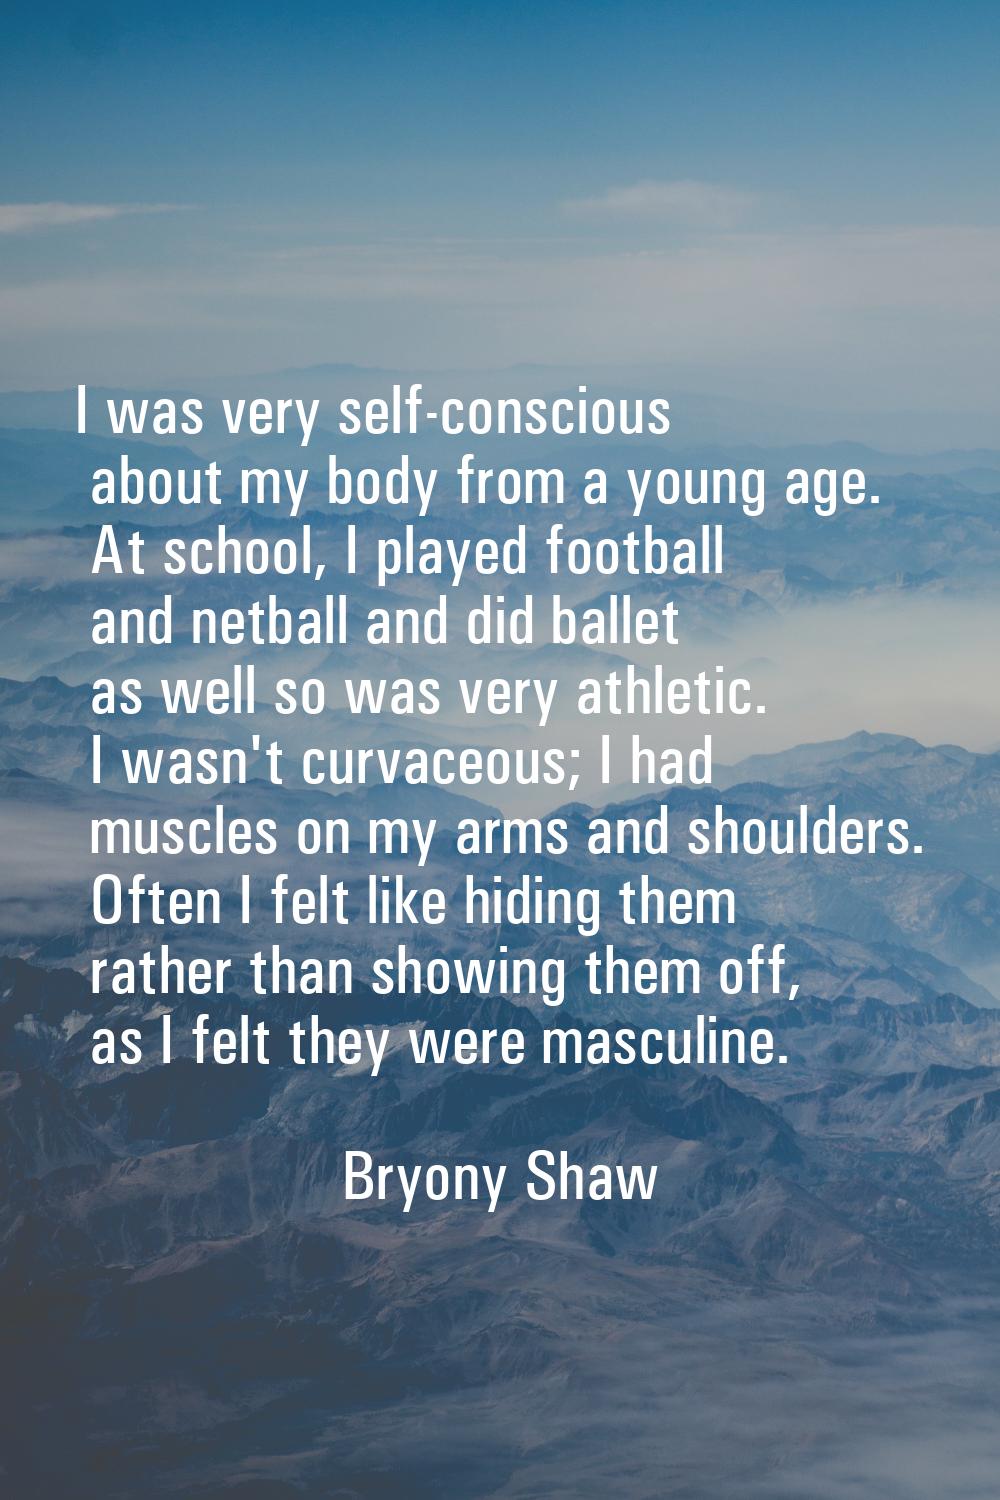 I was very self-conscious about my body from a young age. At school, I played football and netball 